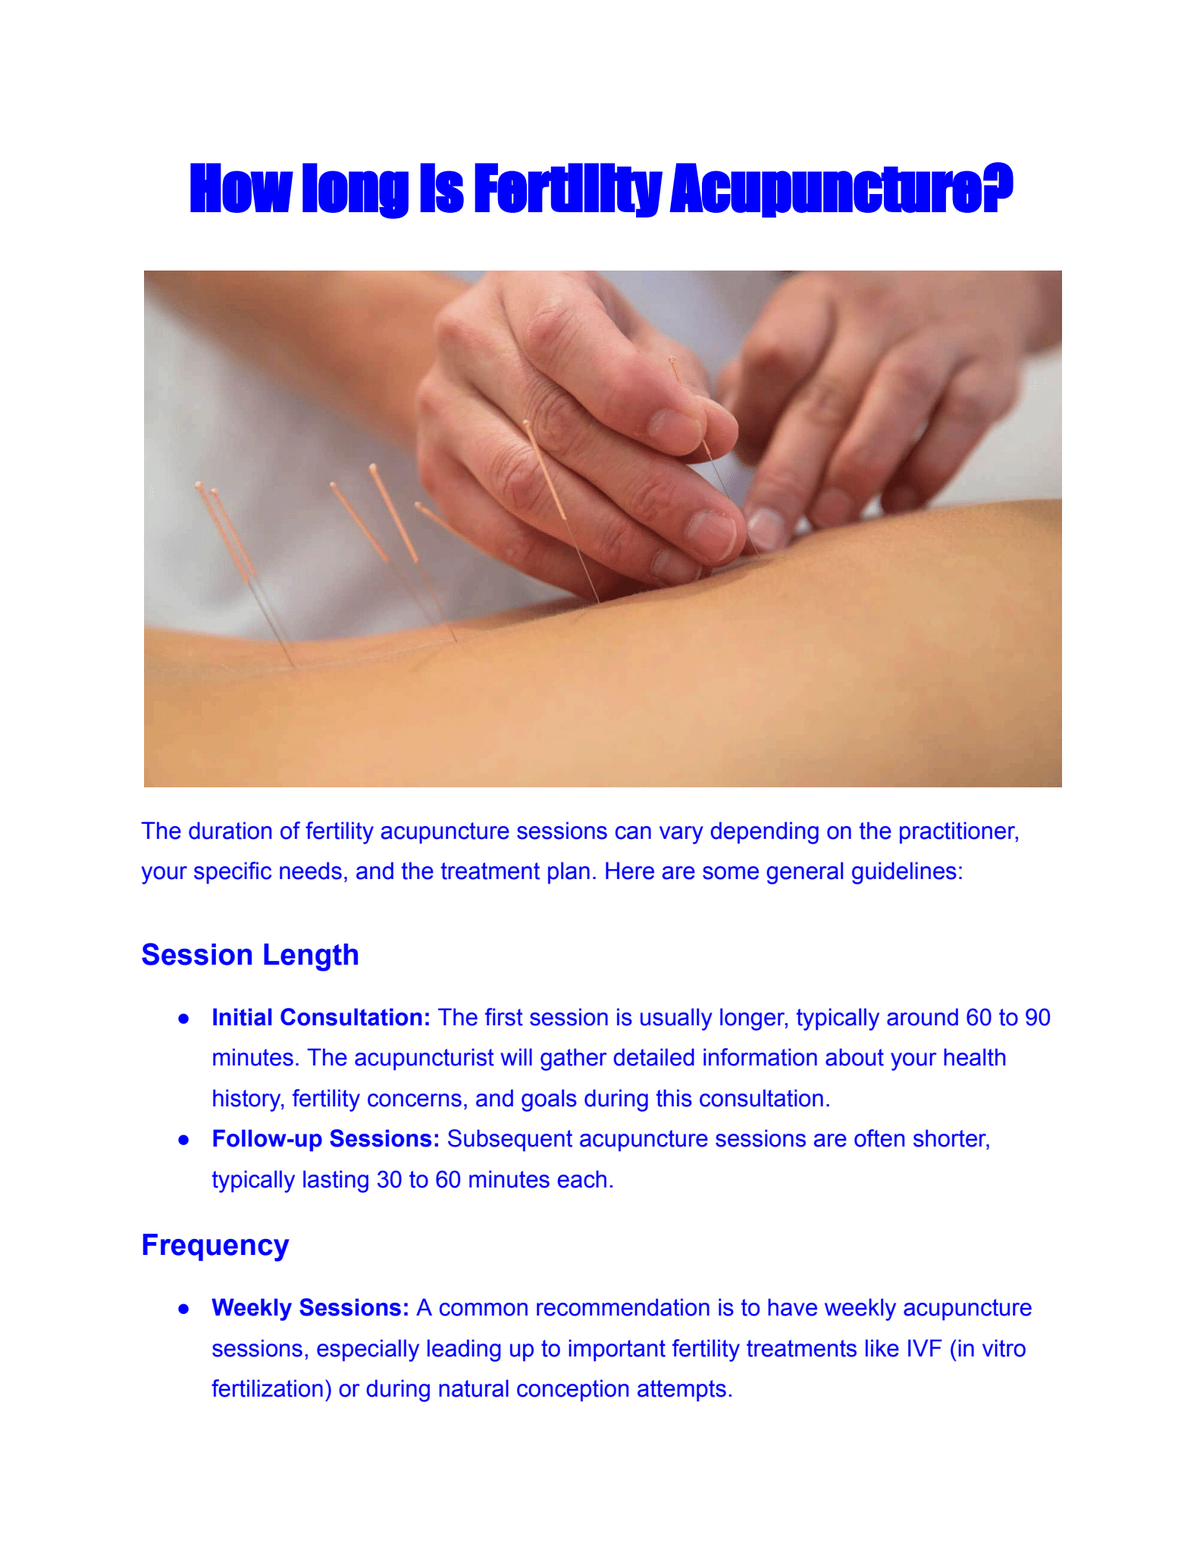 Dropbox - How long is Fertility Acupuncture.pdf - Simplify your life